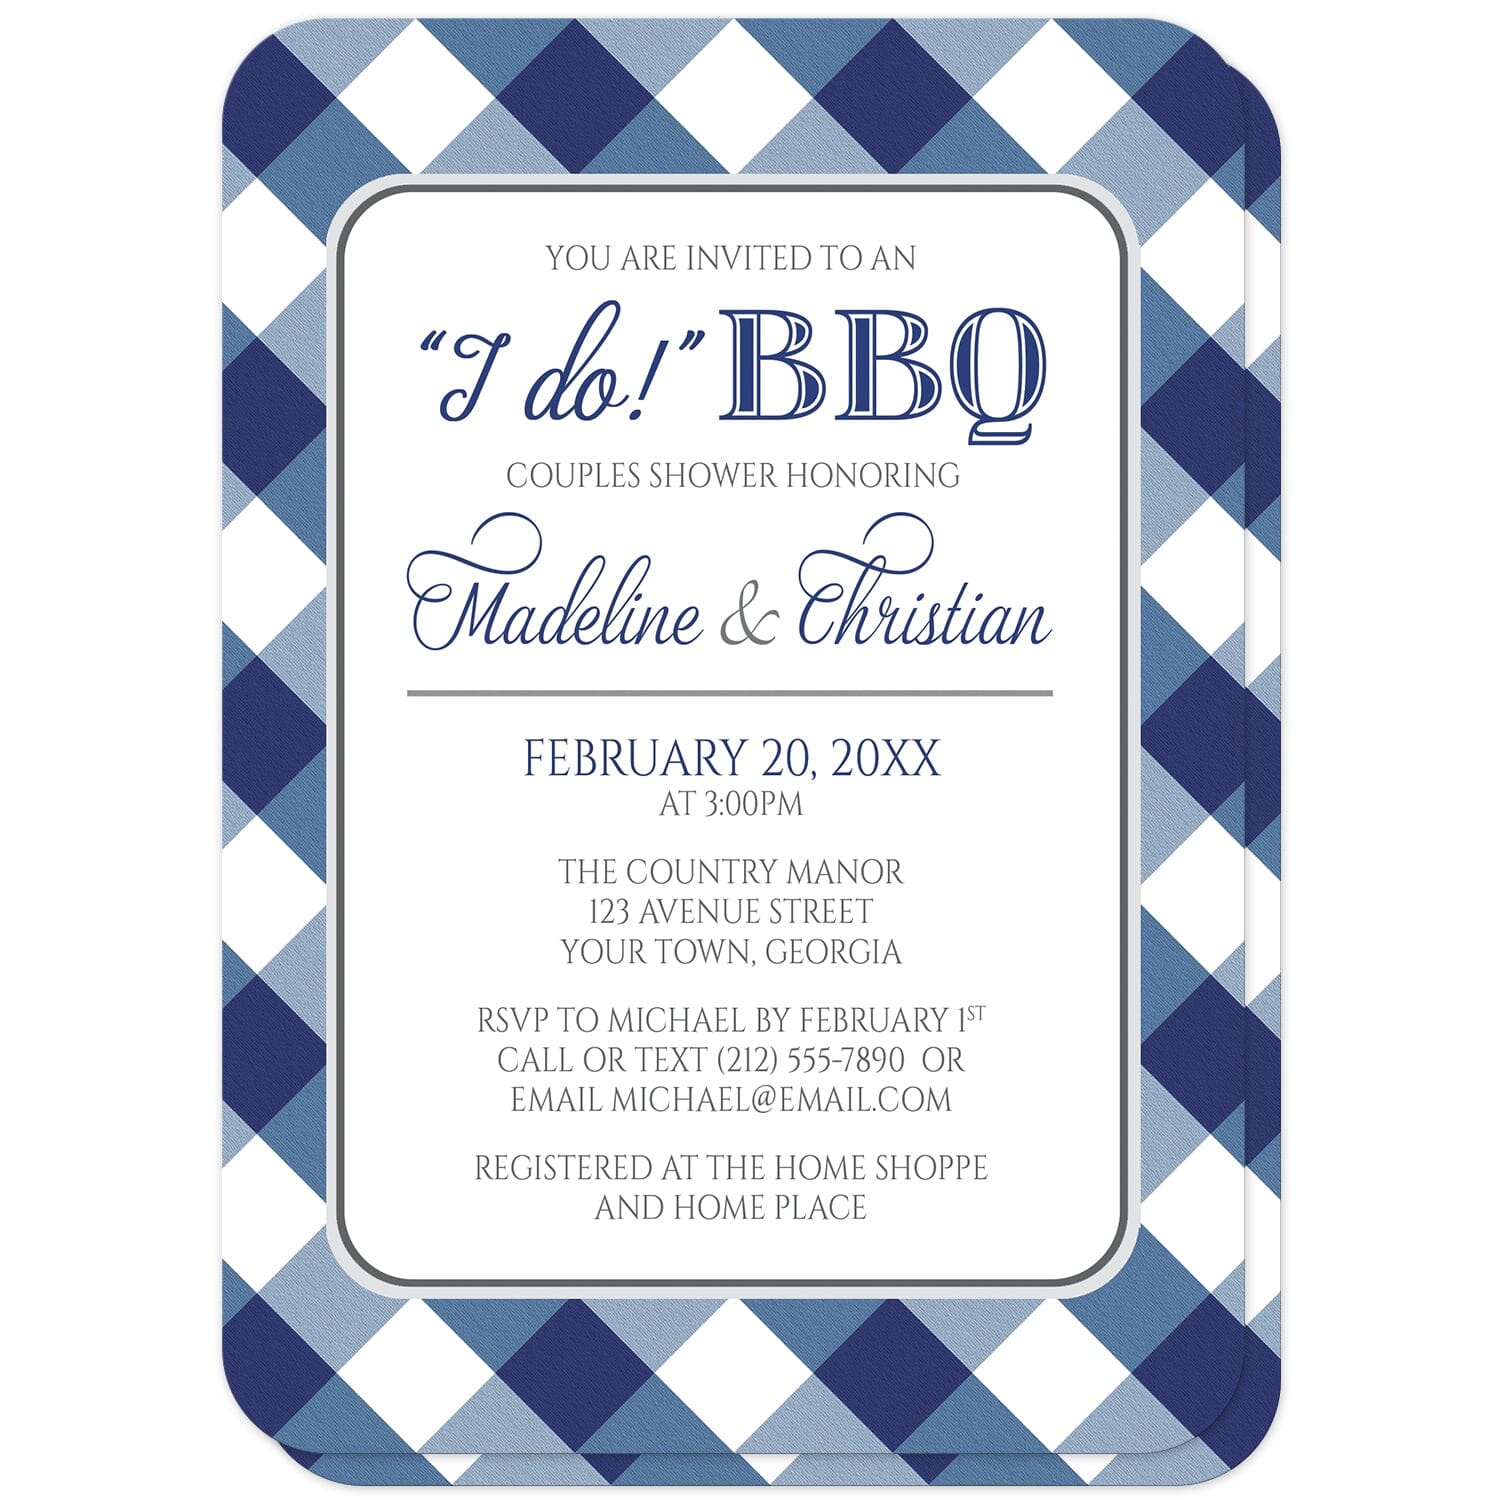 Navy Blue Gingham I Do BBQ Couples Shower Invitations (with rounded corners) at Artistically Invited. Navy blue gingham I Do BBQ couples shower invitations with your celebration details in navy blue and gray, in a white rounded corners frame, over a diagonal navy blue and white gingham pattern background.